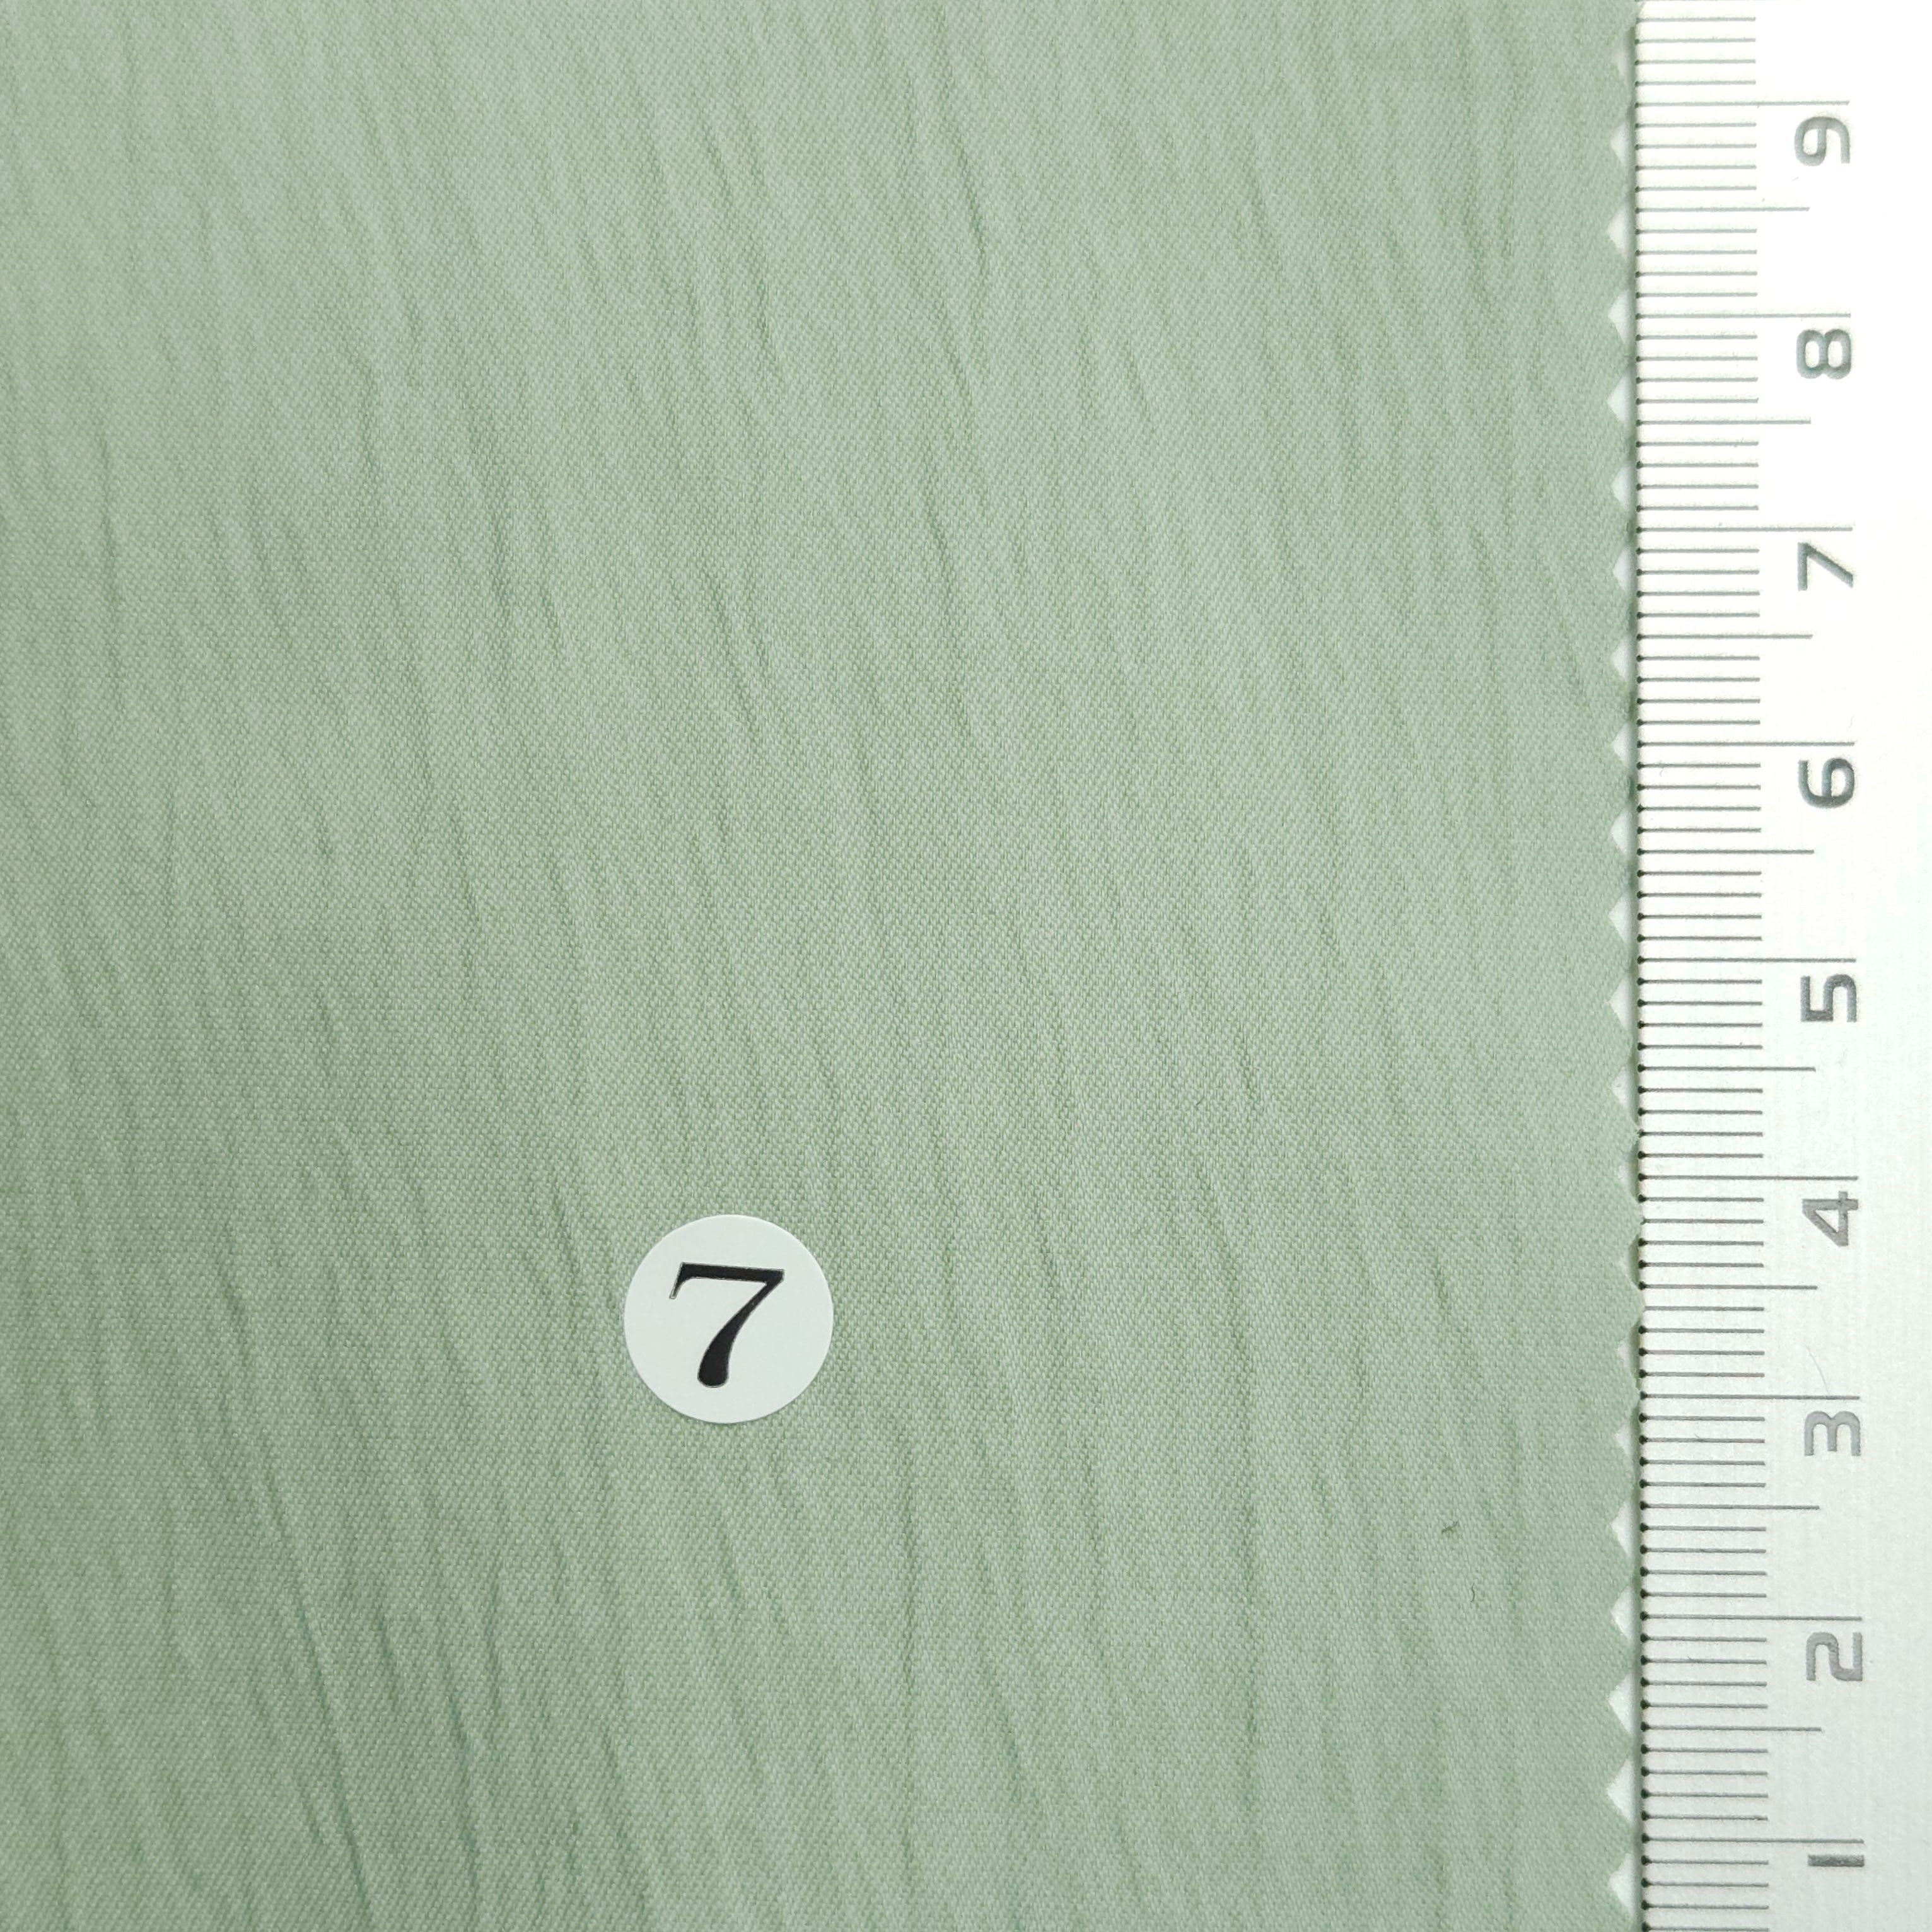 Solid Nylon Spandex Woven Fabric | FAB1553 | 1.Snuff, 2.Alto, 3.White, 4.Off Green, 5.Ottoman, 6.Spindle, 7.Jet Stream, 8.Shadow Green, 9.Kangaroo, 10.Sisal by Fabricis.com #